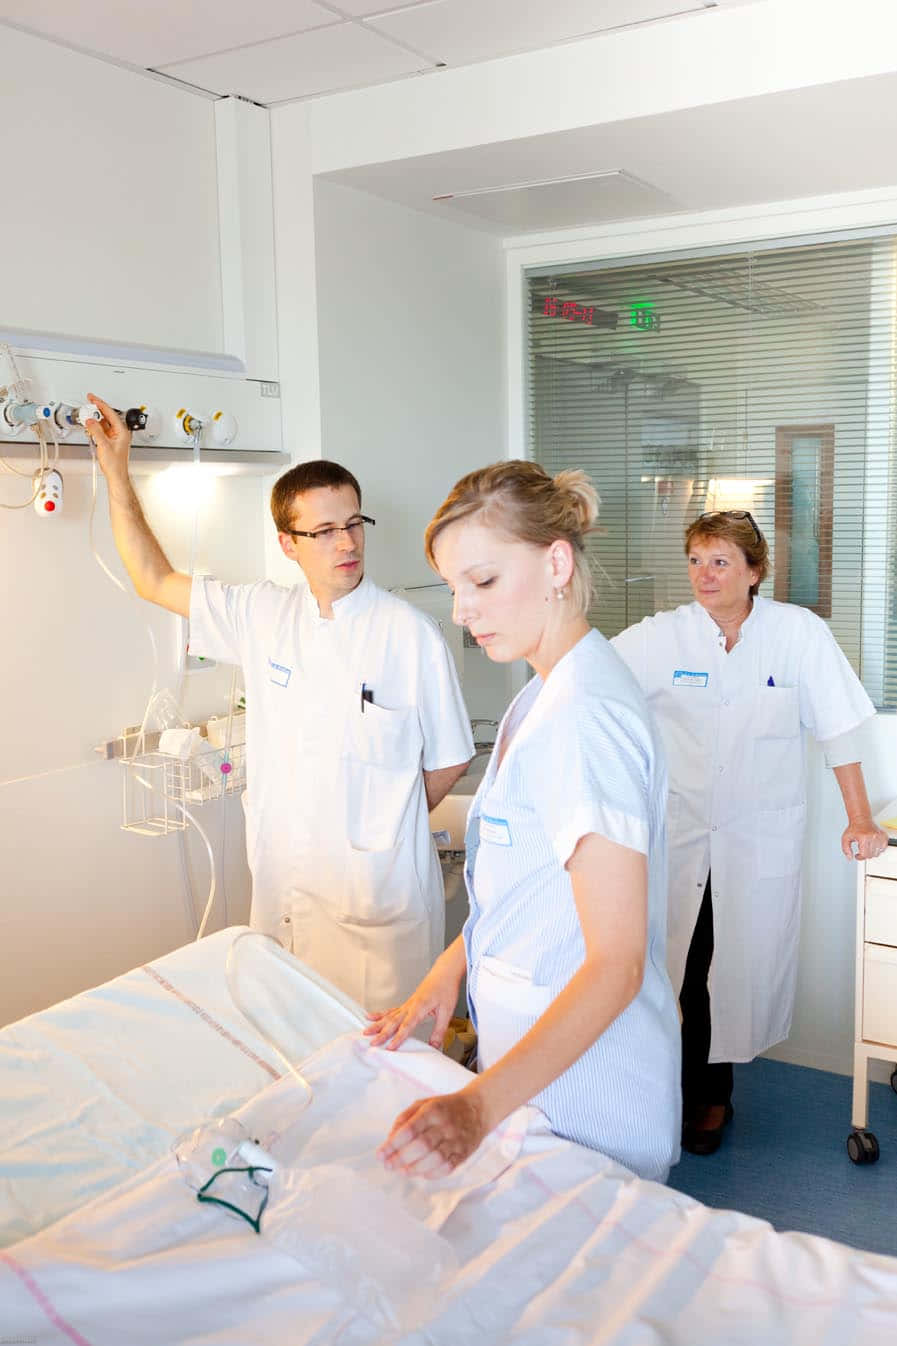 A Group Of People Standing Around A Bed In A Hospital